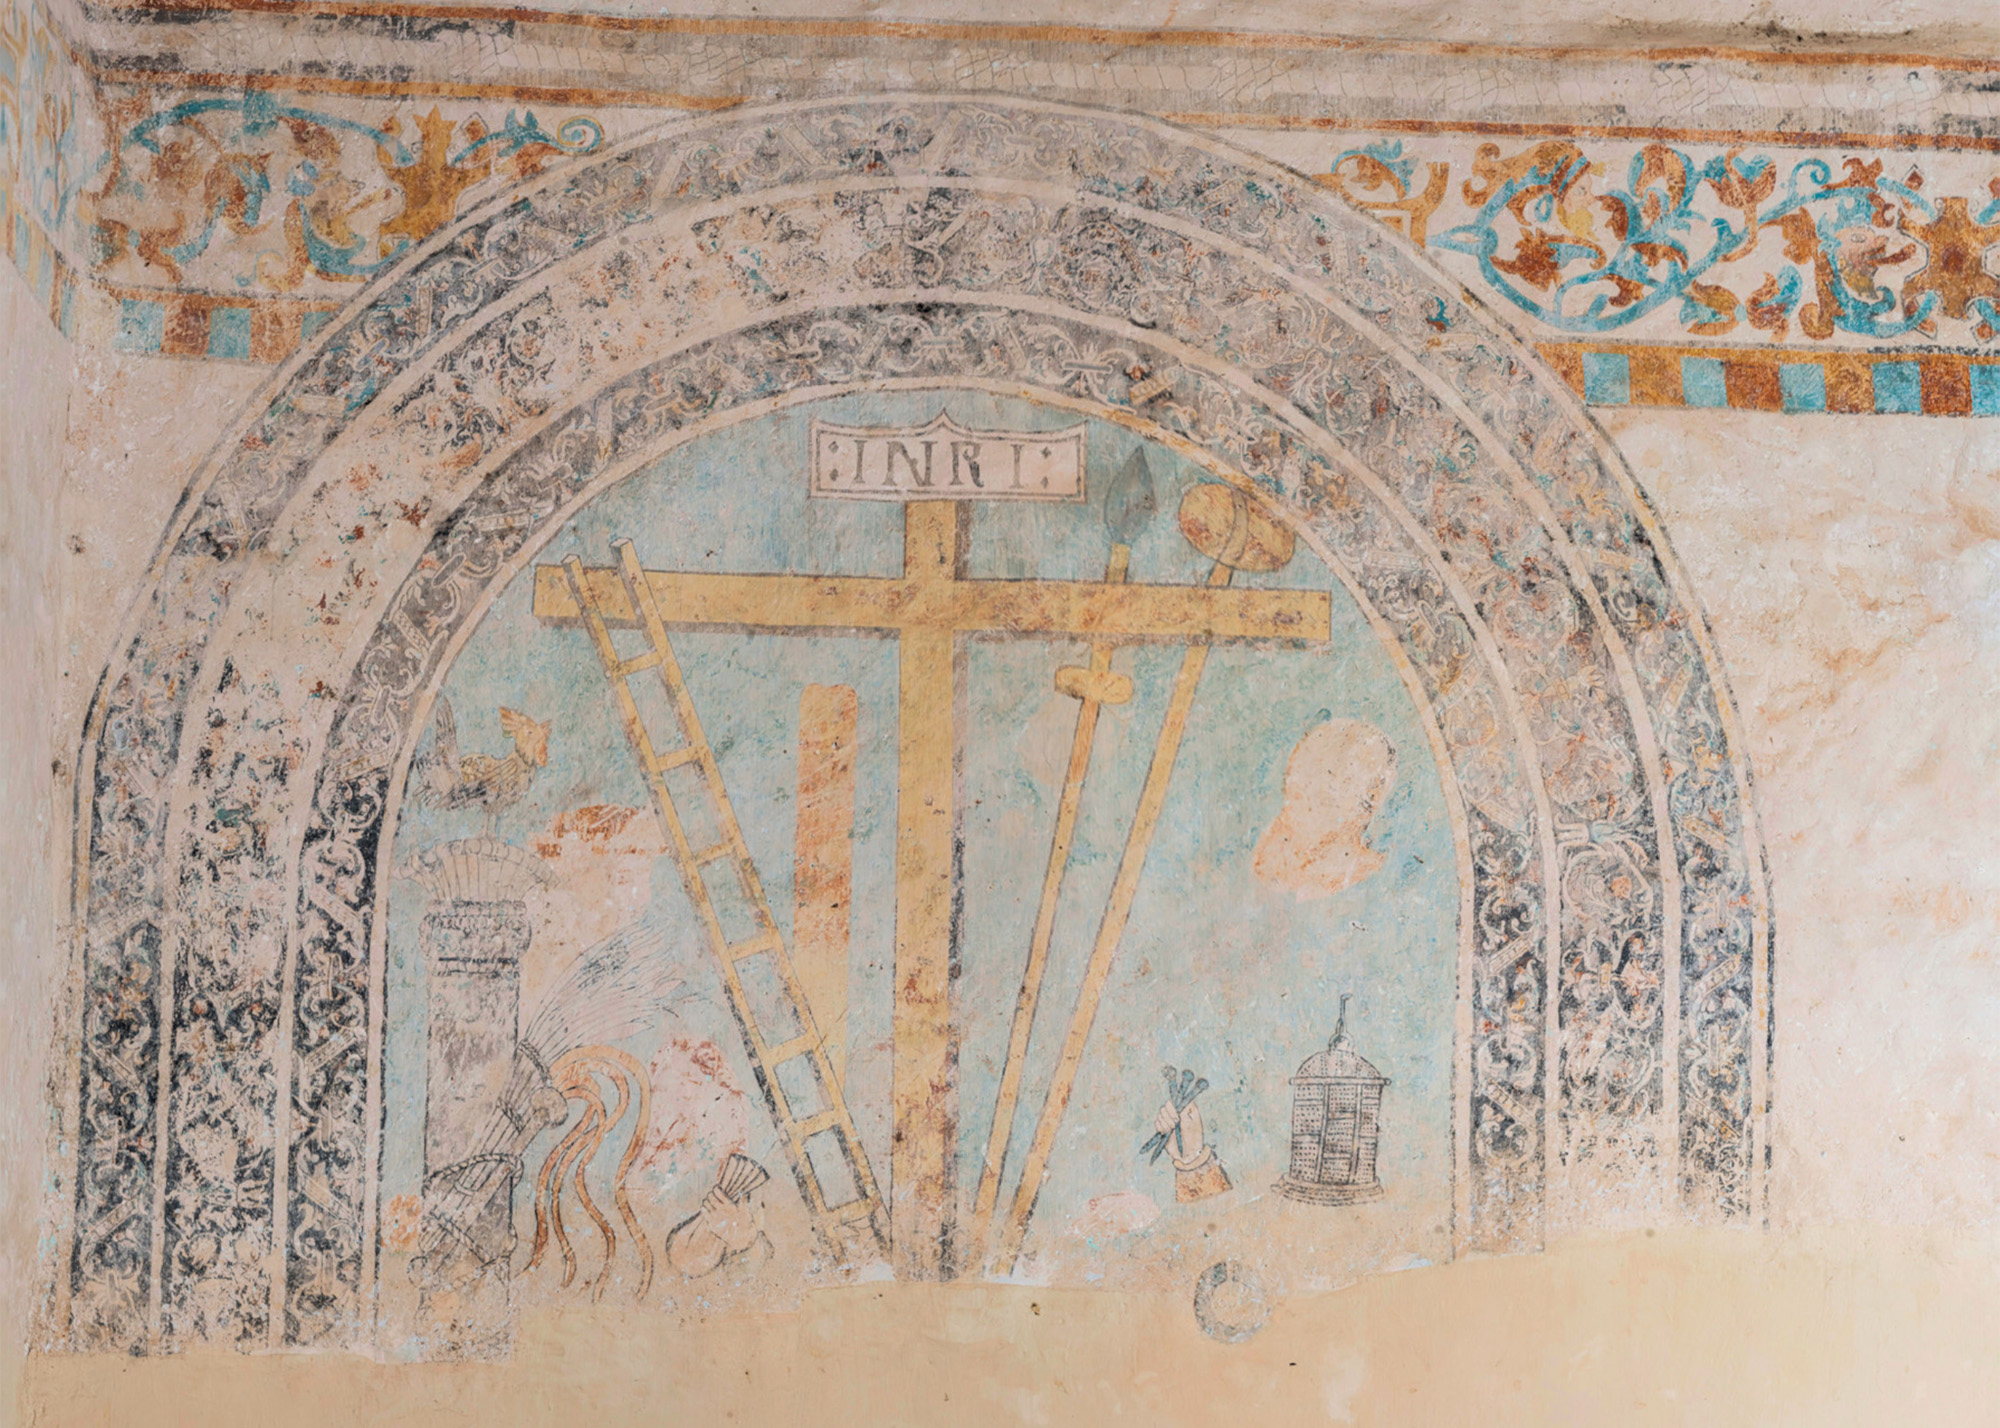 Mural uncovered by Linda Williams in the Yucatan region of Mexico.